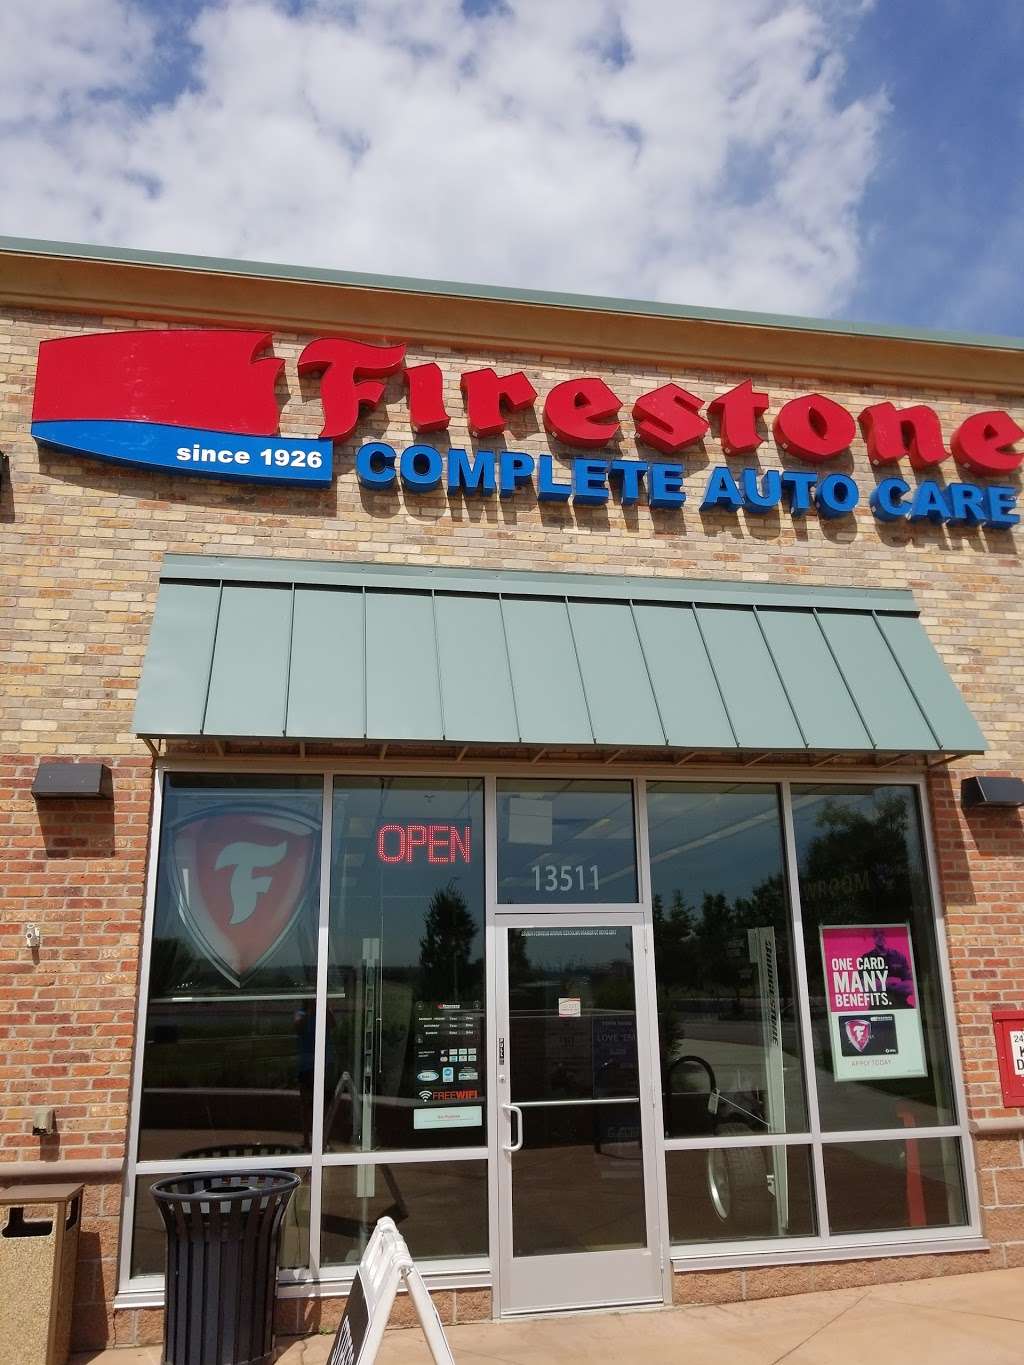 Firestone Complete Auto Care | 13511 Huron St, Westminster, CO 80234 | Phone: (303) 515-7321